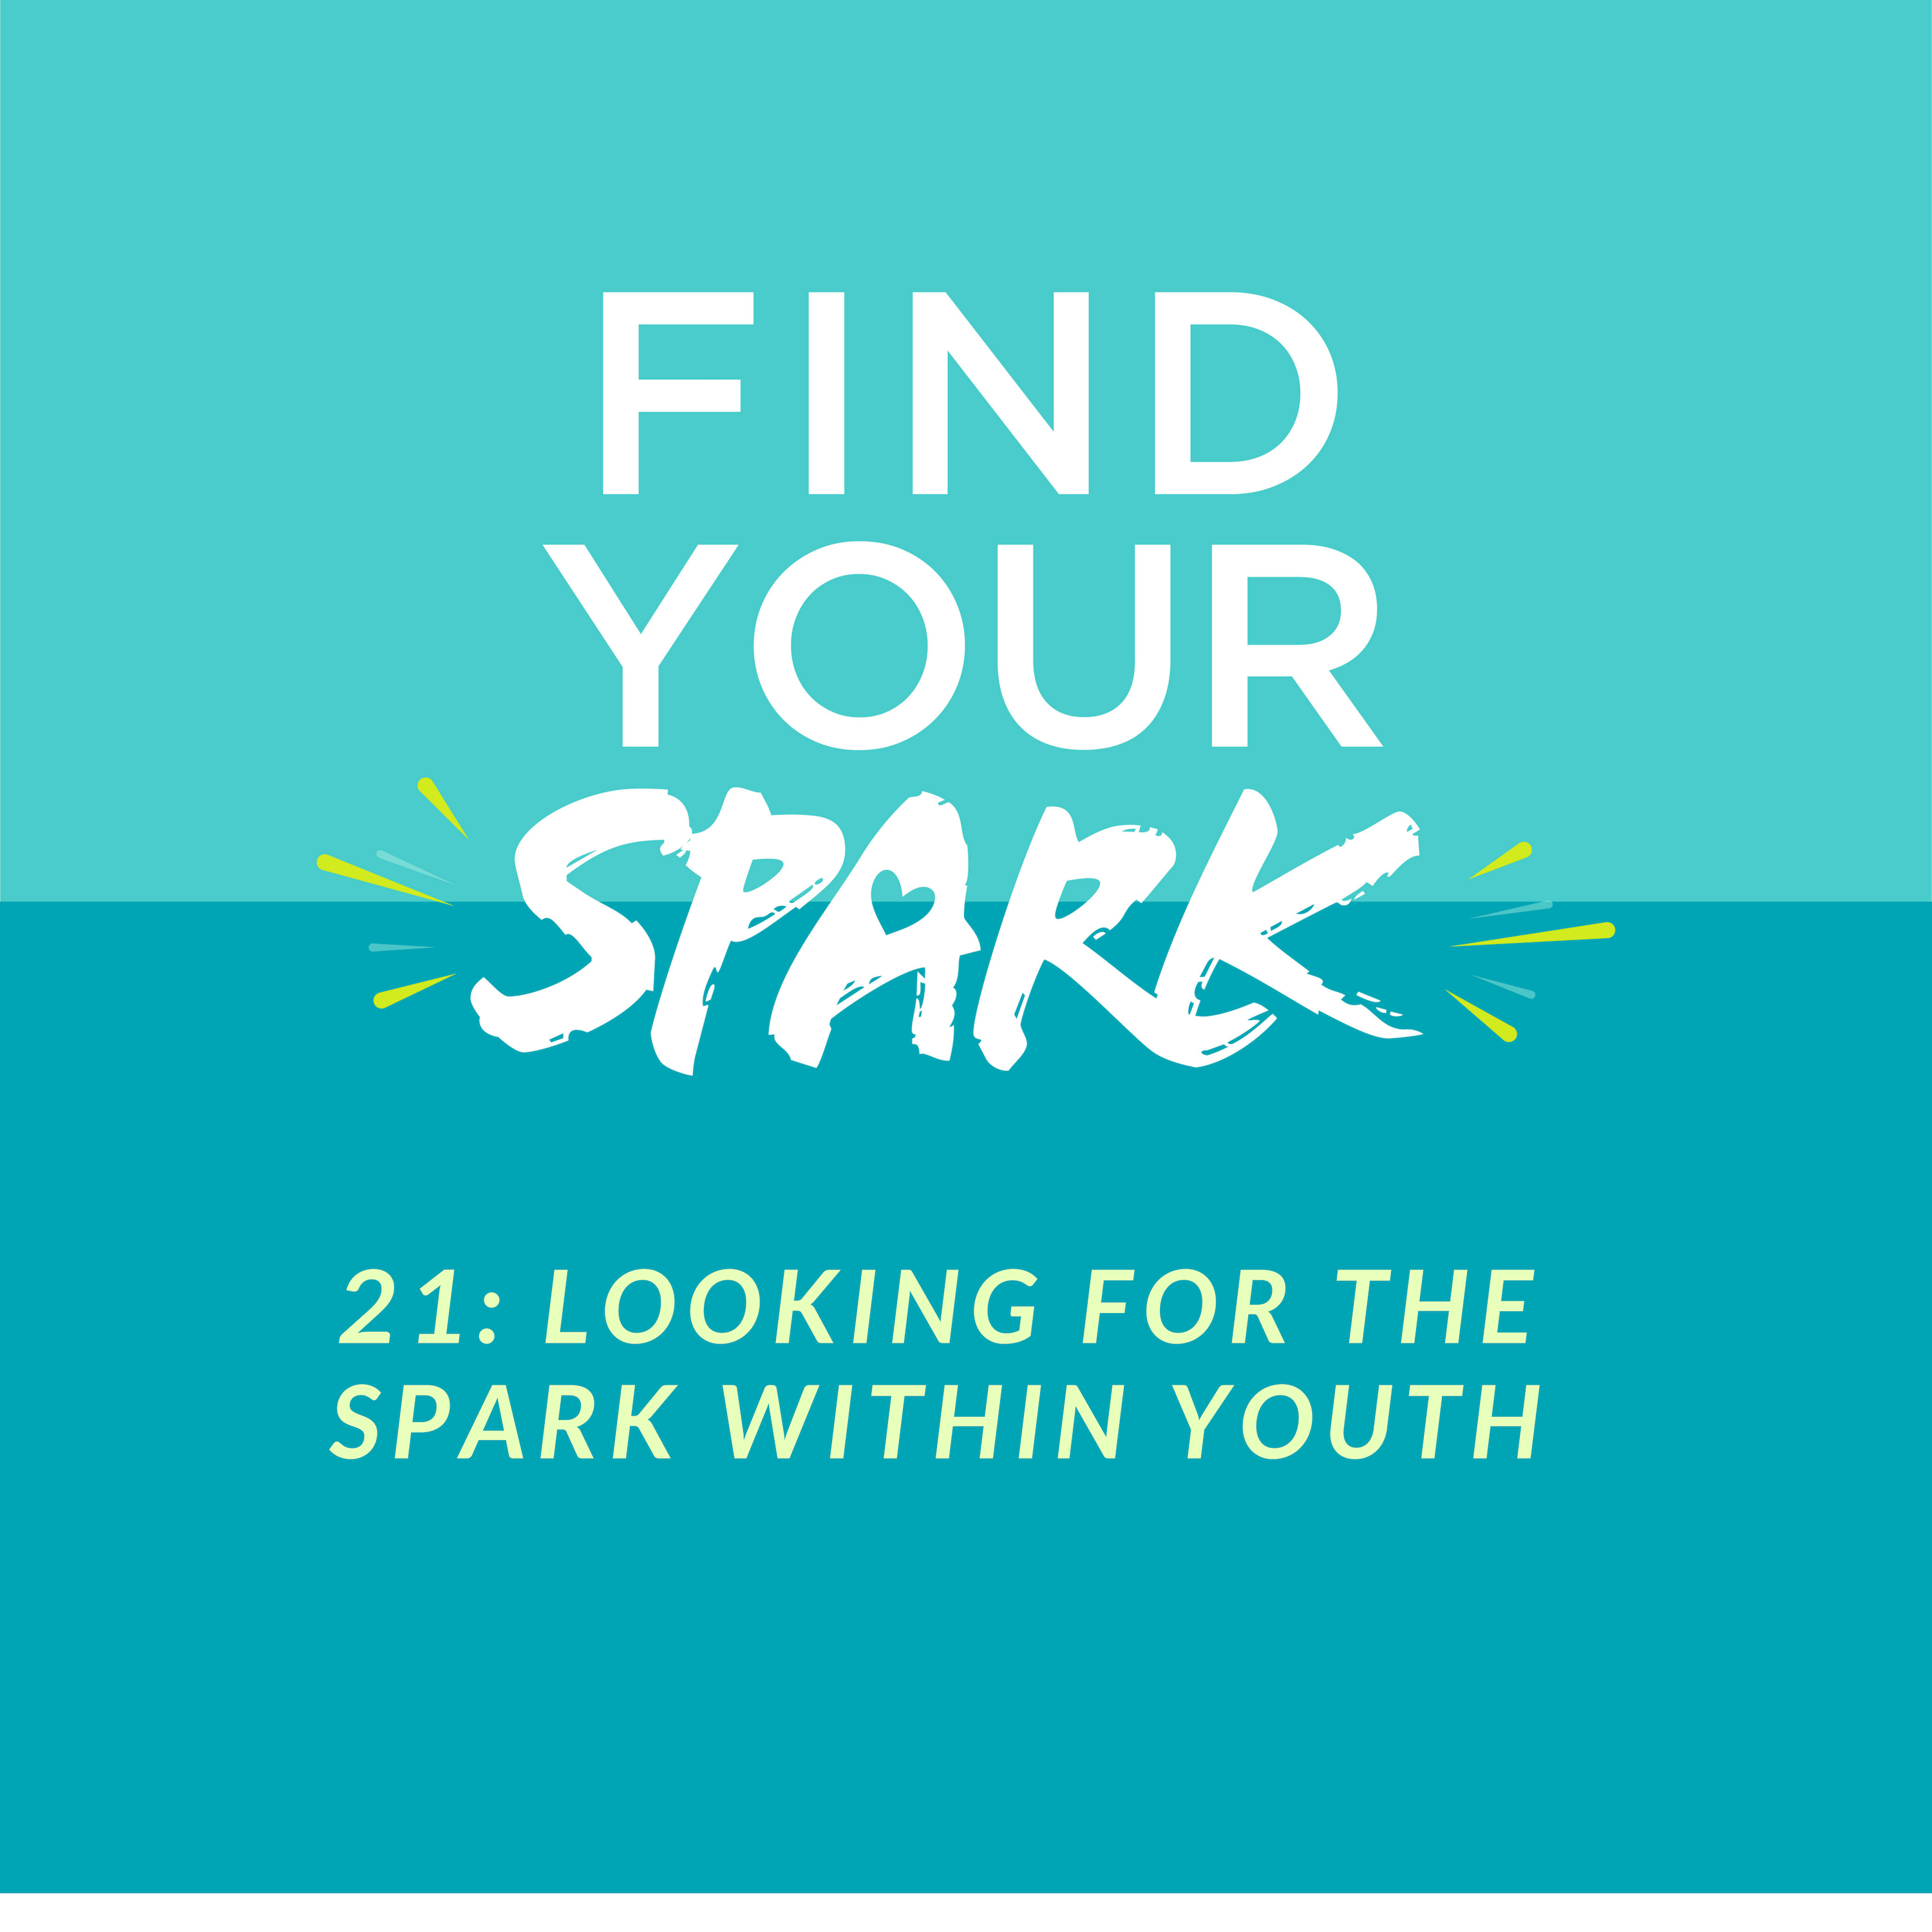 21: Looking for the SPARK within Youth